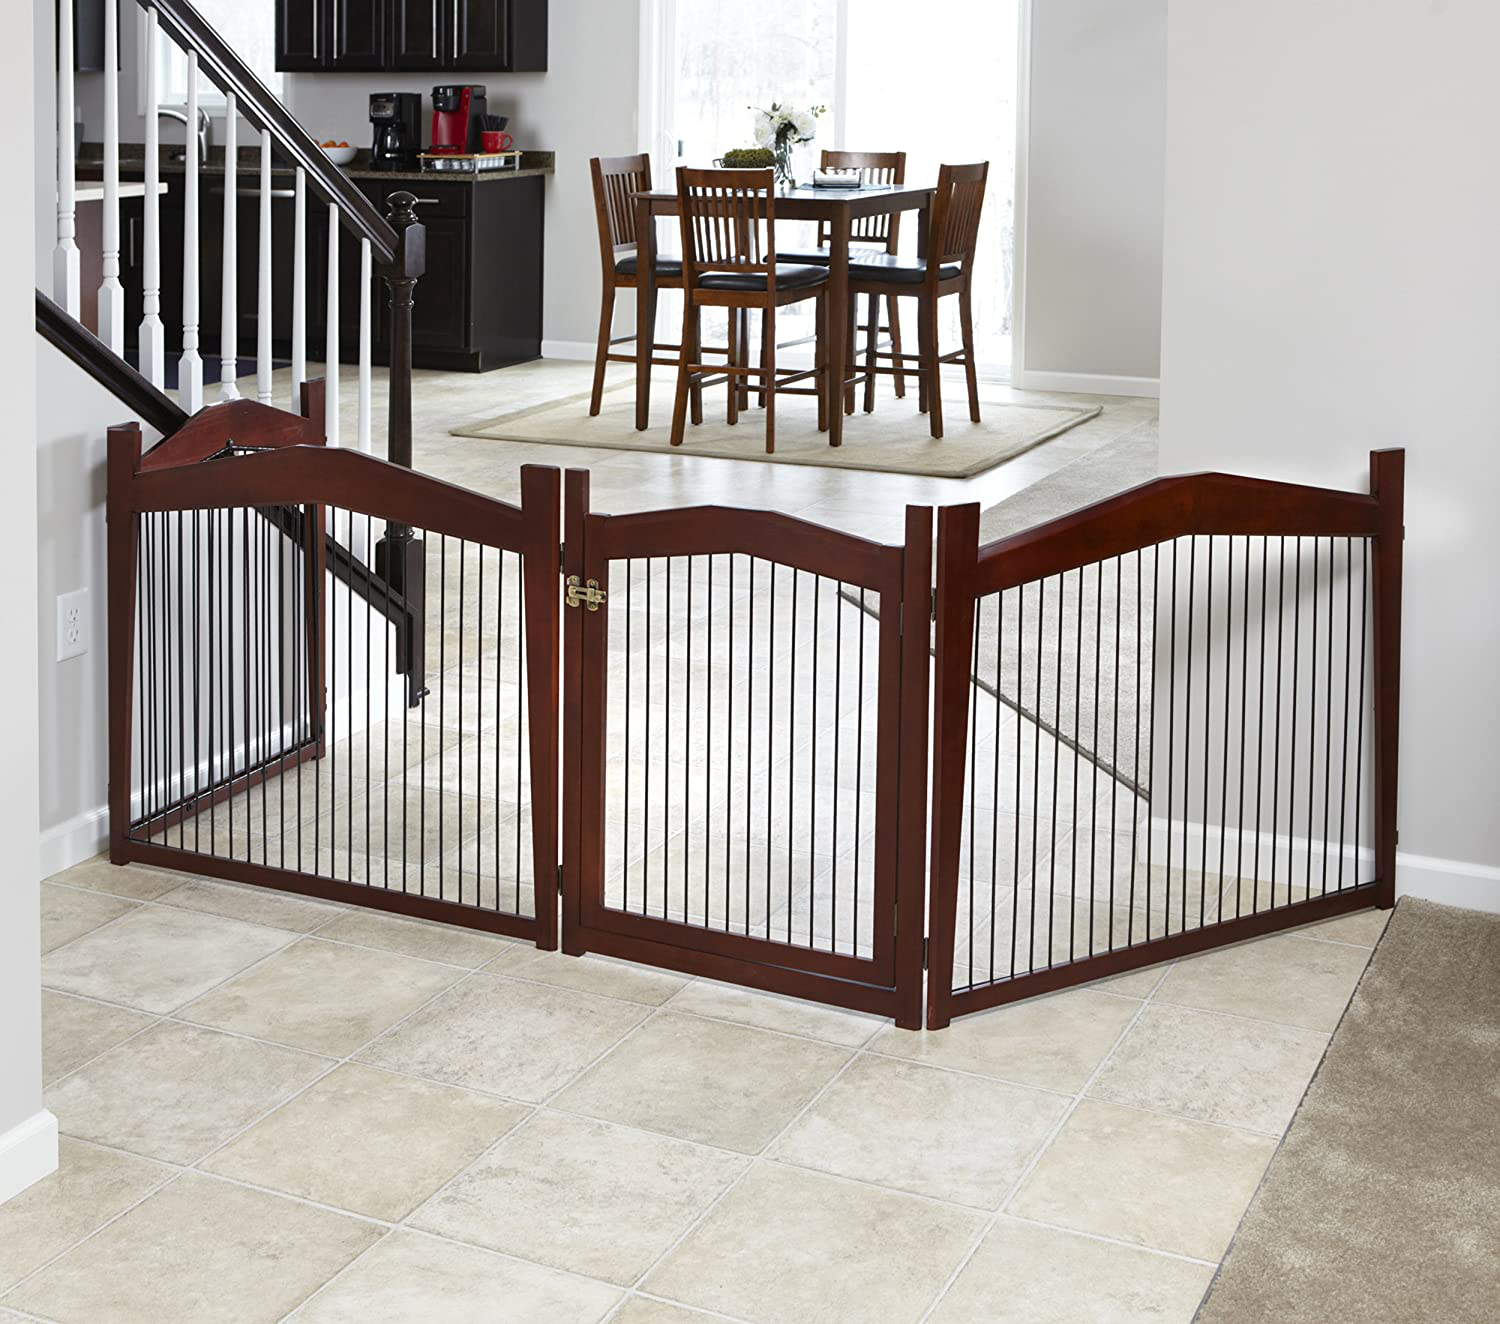 Merry Pet 2-In-1 Configurable Pet Crate and Gate, Brown, Large Animals & Pet Supplies > Pet Supplies > Dog Supplies > Dog Kennels & Runs Merry Pet   